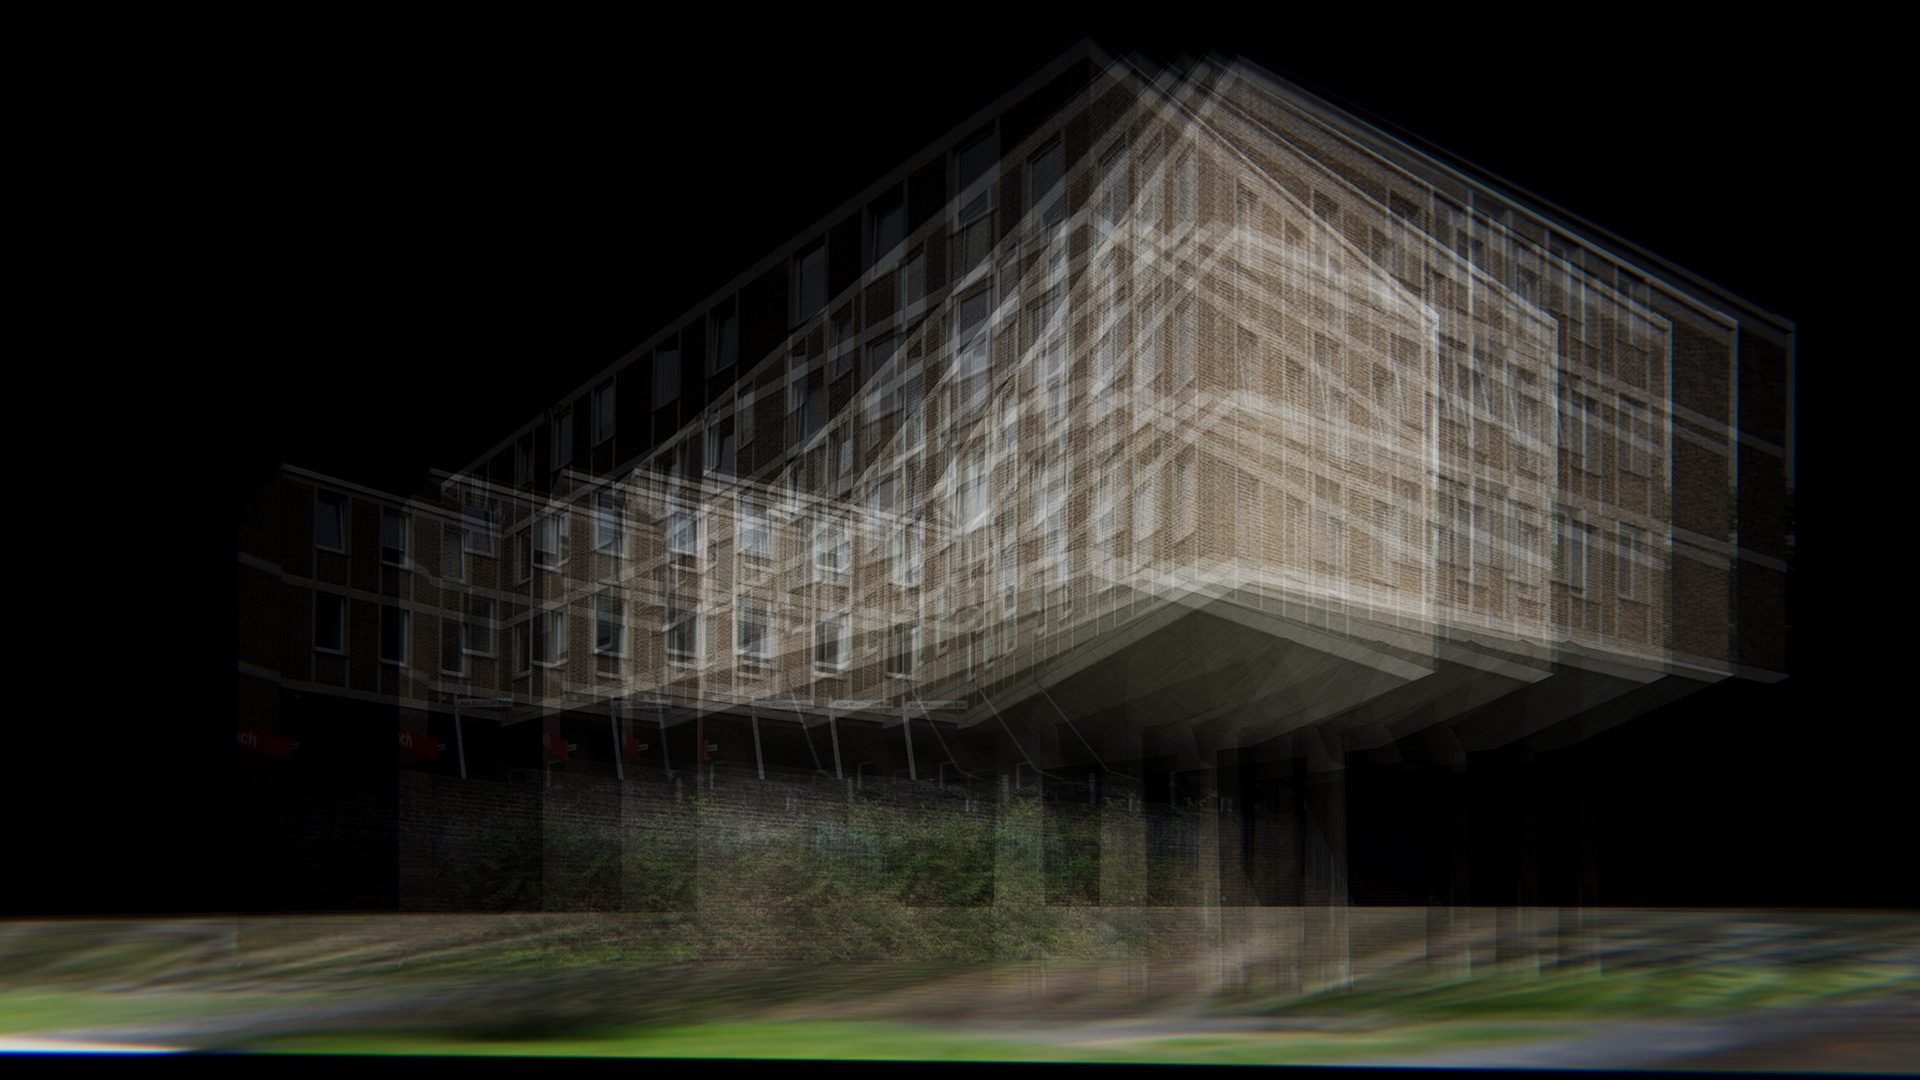 multiexposure of building viewed from different angles with black background